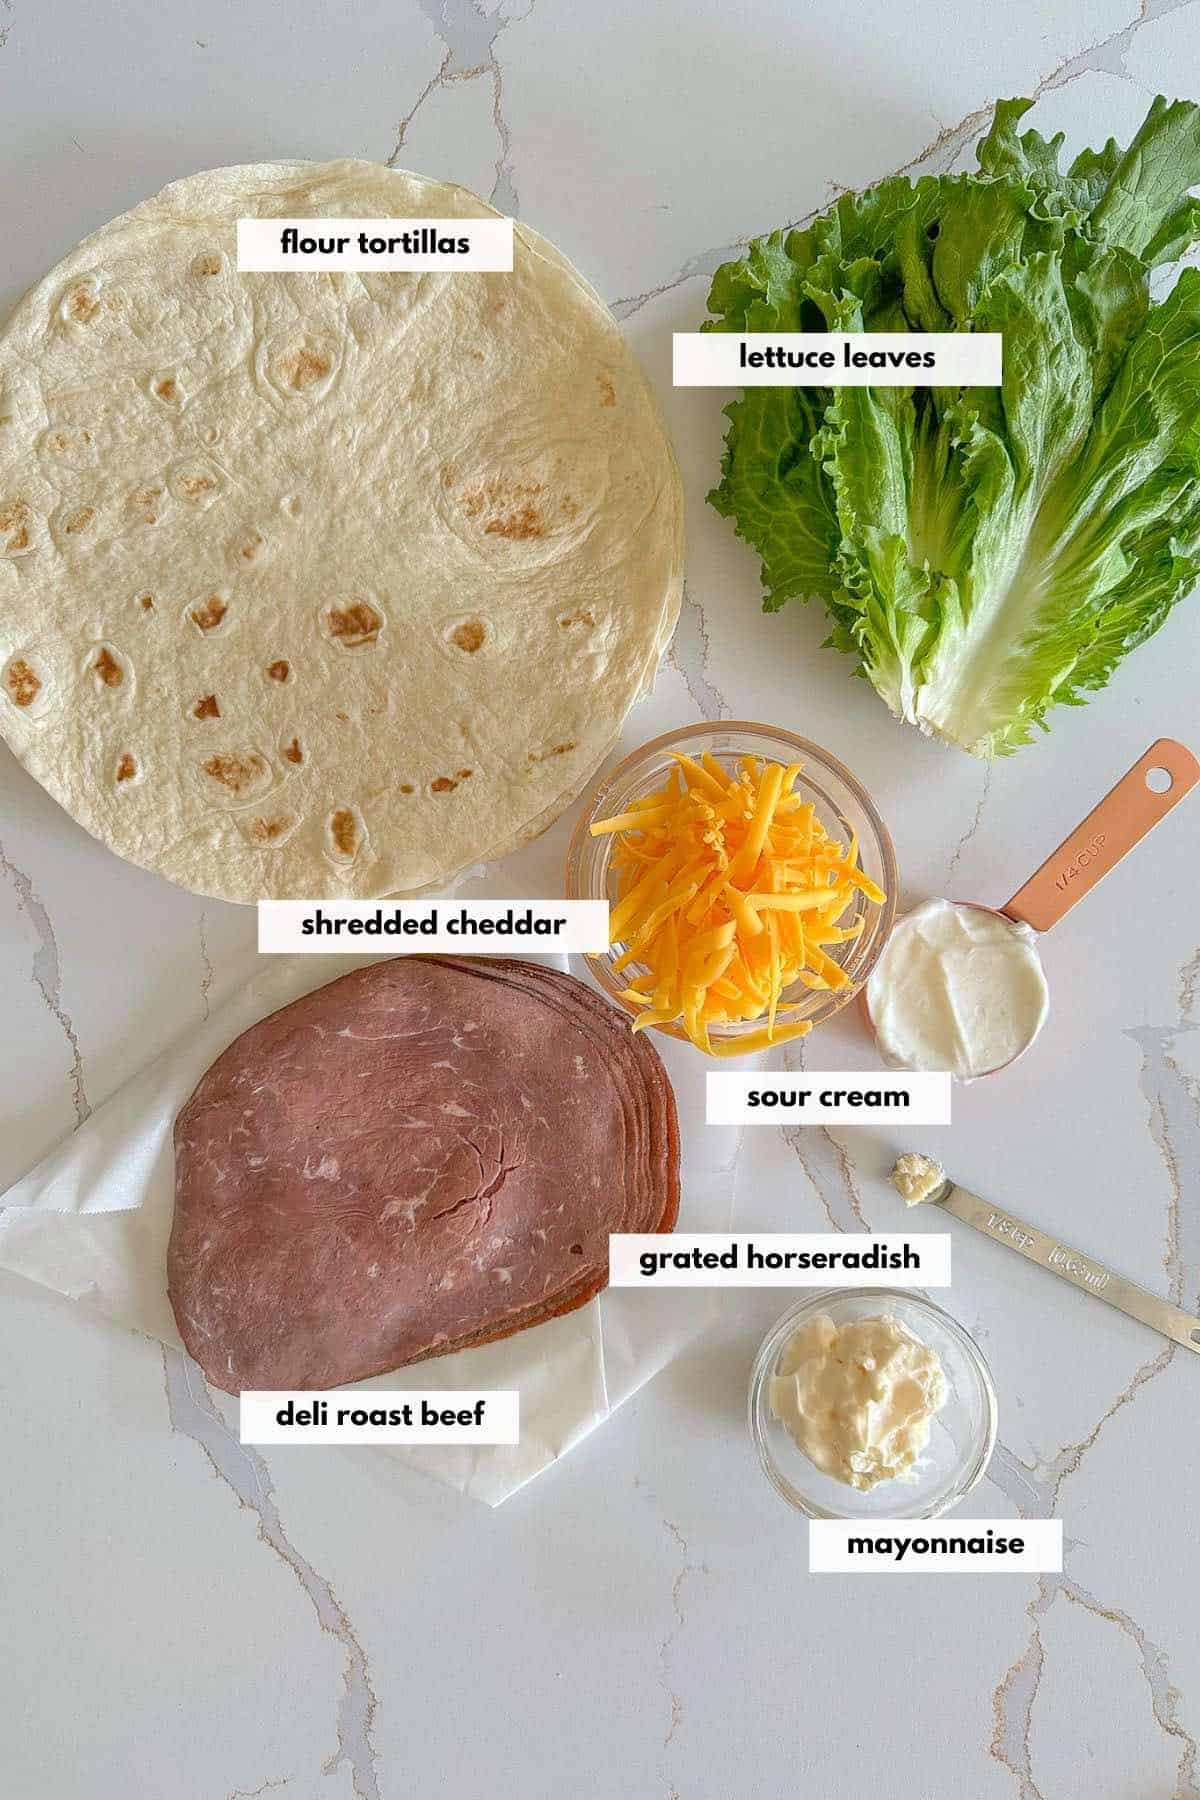 Ingredients to make this recipe are deli roast beef, shredded cheddar cheese, lettuce leaves, flour tortillas, grated horseradish, sour cream and mayonnaise.